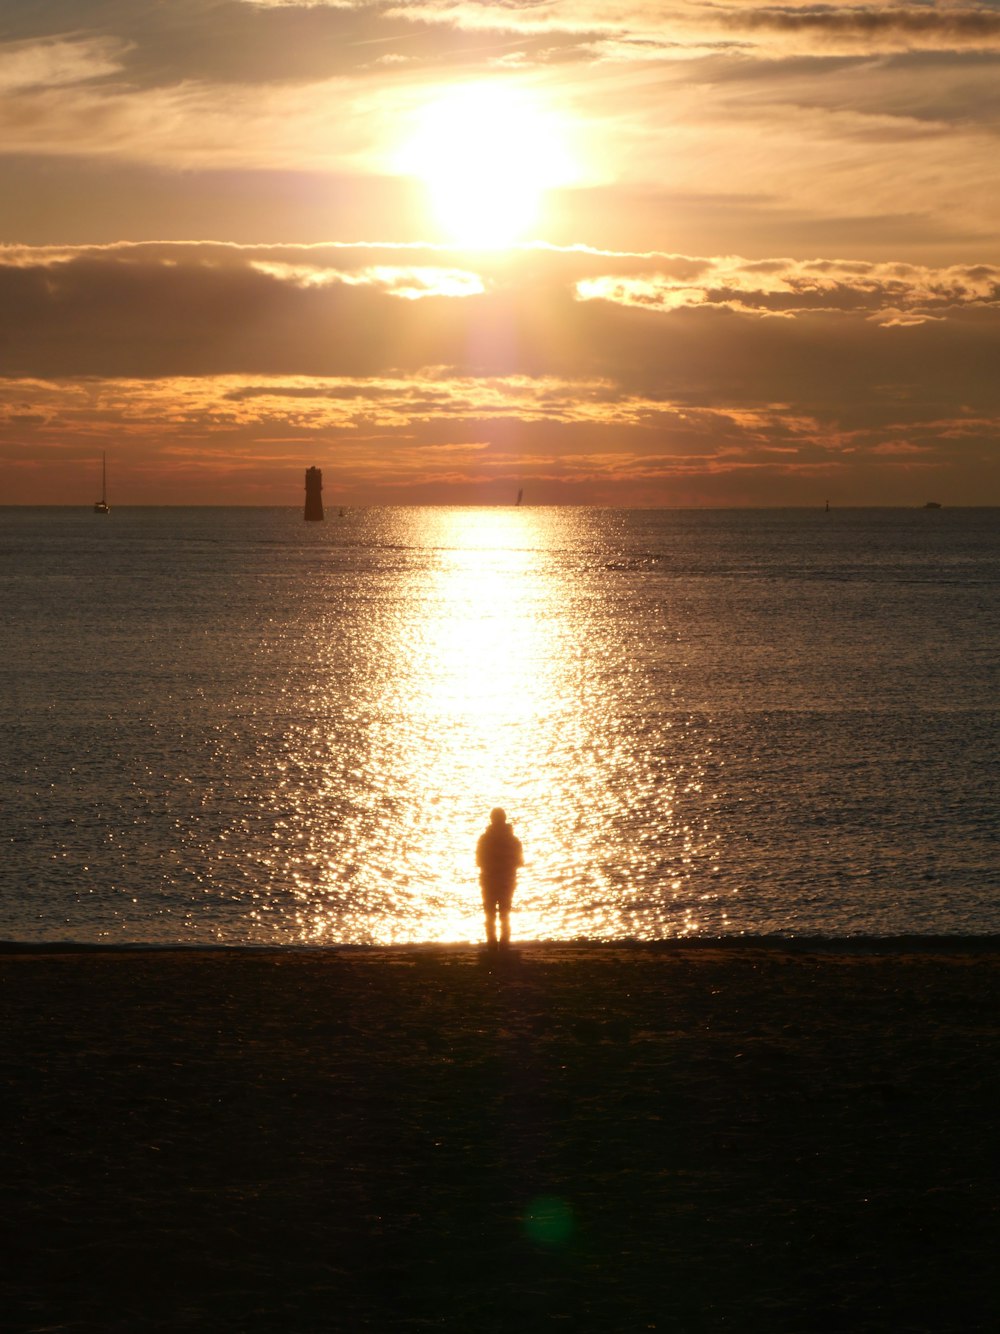 a person standing on a beach watching the sun set